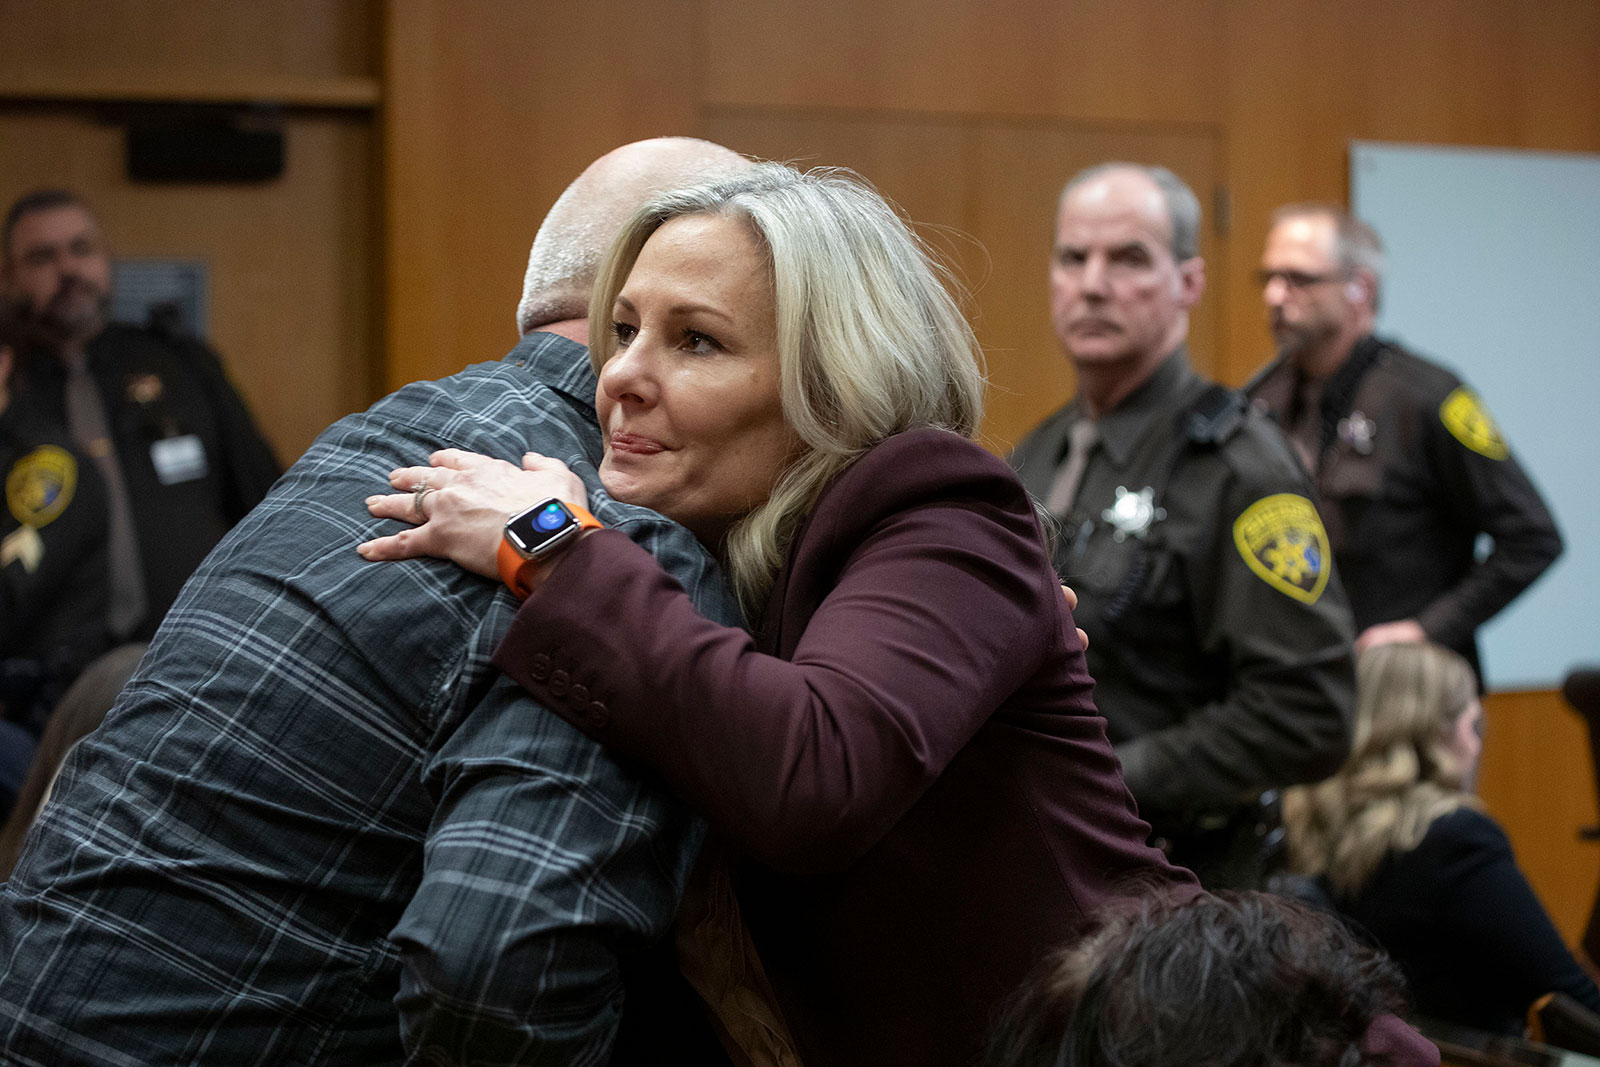 Oakland County Prosecutor Karen McDonald hugs Craig Shilling after a jury found Jennifer Crumbley guilty on four counts of involuntary manslaughter on Tuesday at Oakland County Circuit Court in Pontiac, Michigan. 